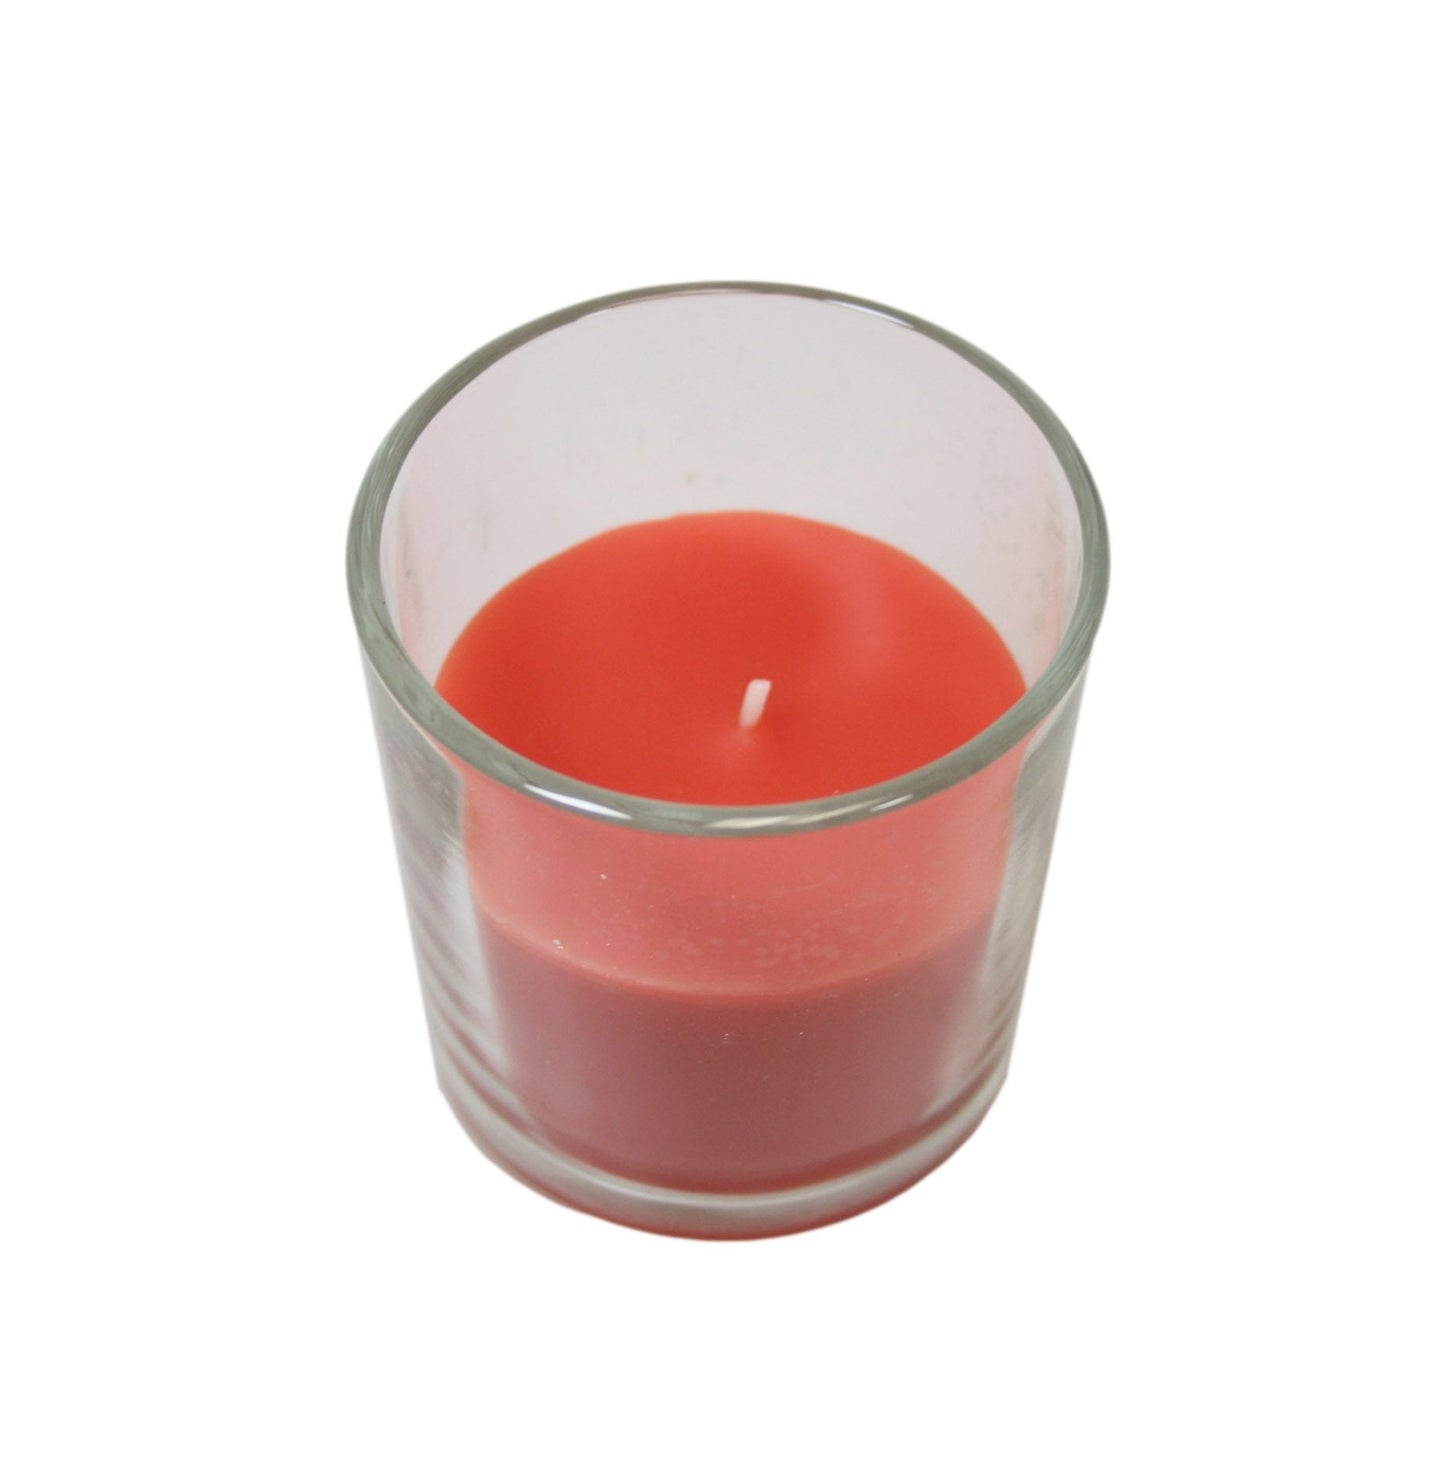 Opella Scented Candle In Glass Jar Fresh Berries Fragrance 5 x 6.5 cm CDJARB (Parcel Rate)